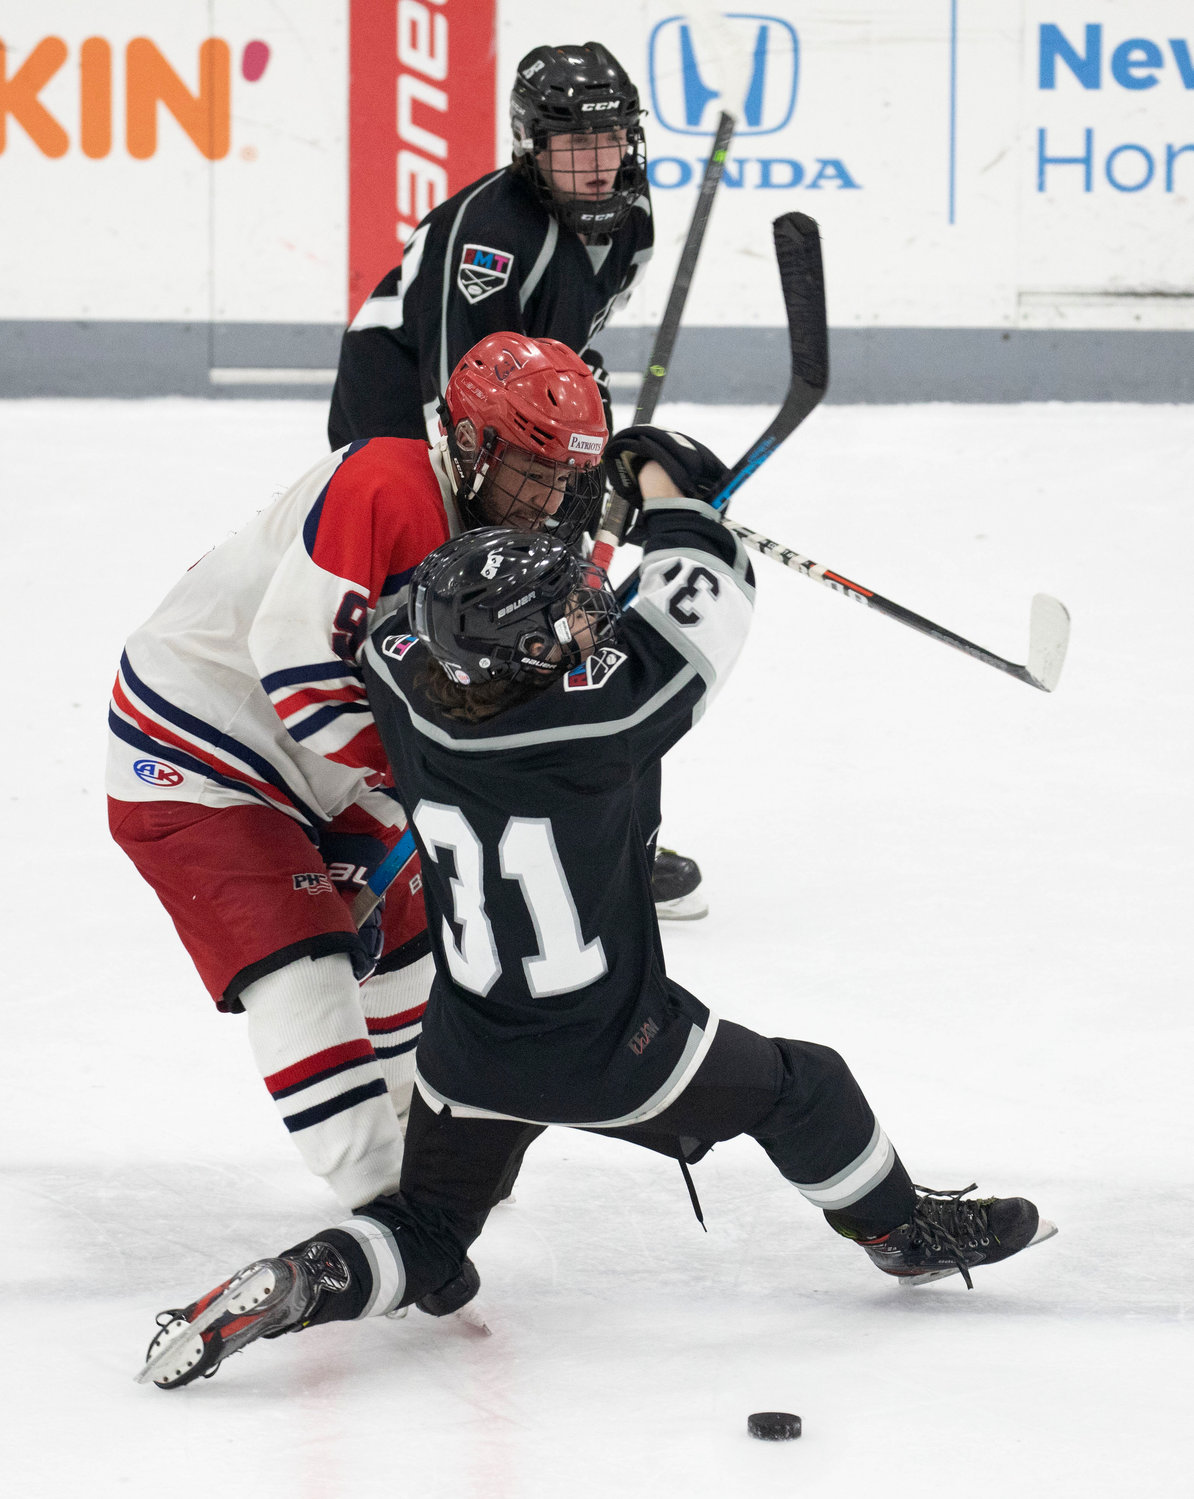 Portsmouth defenseman James LeBreux takes down Hurricanes forward Brayden Swanycamp at mid ice in the second period.